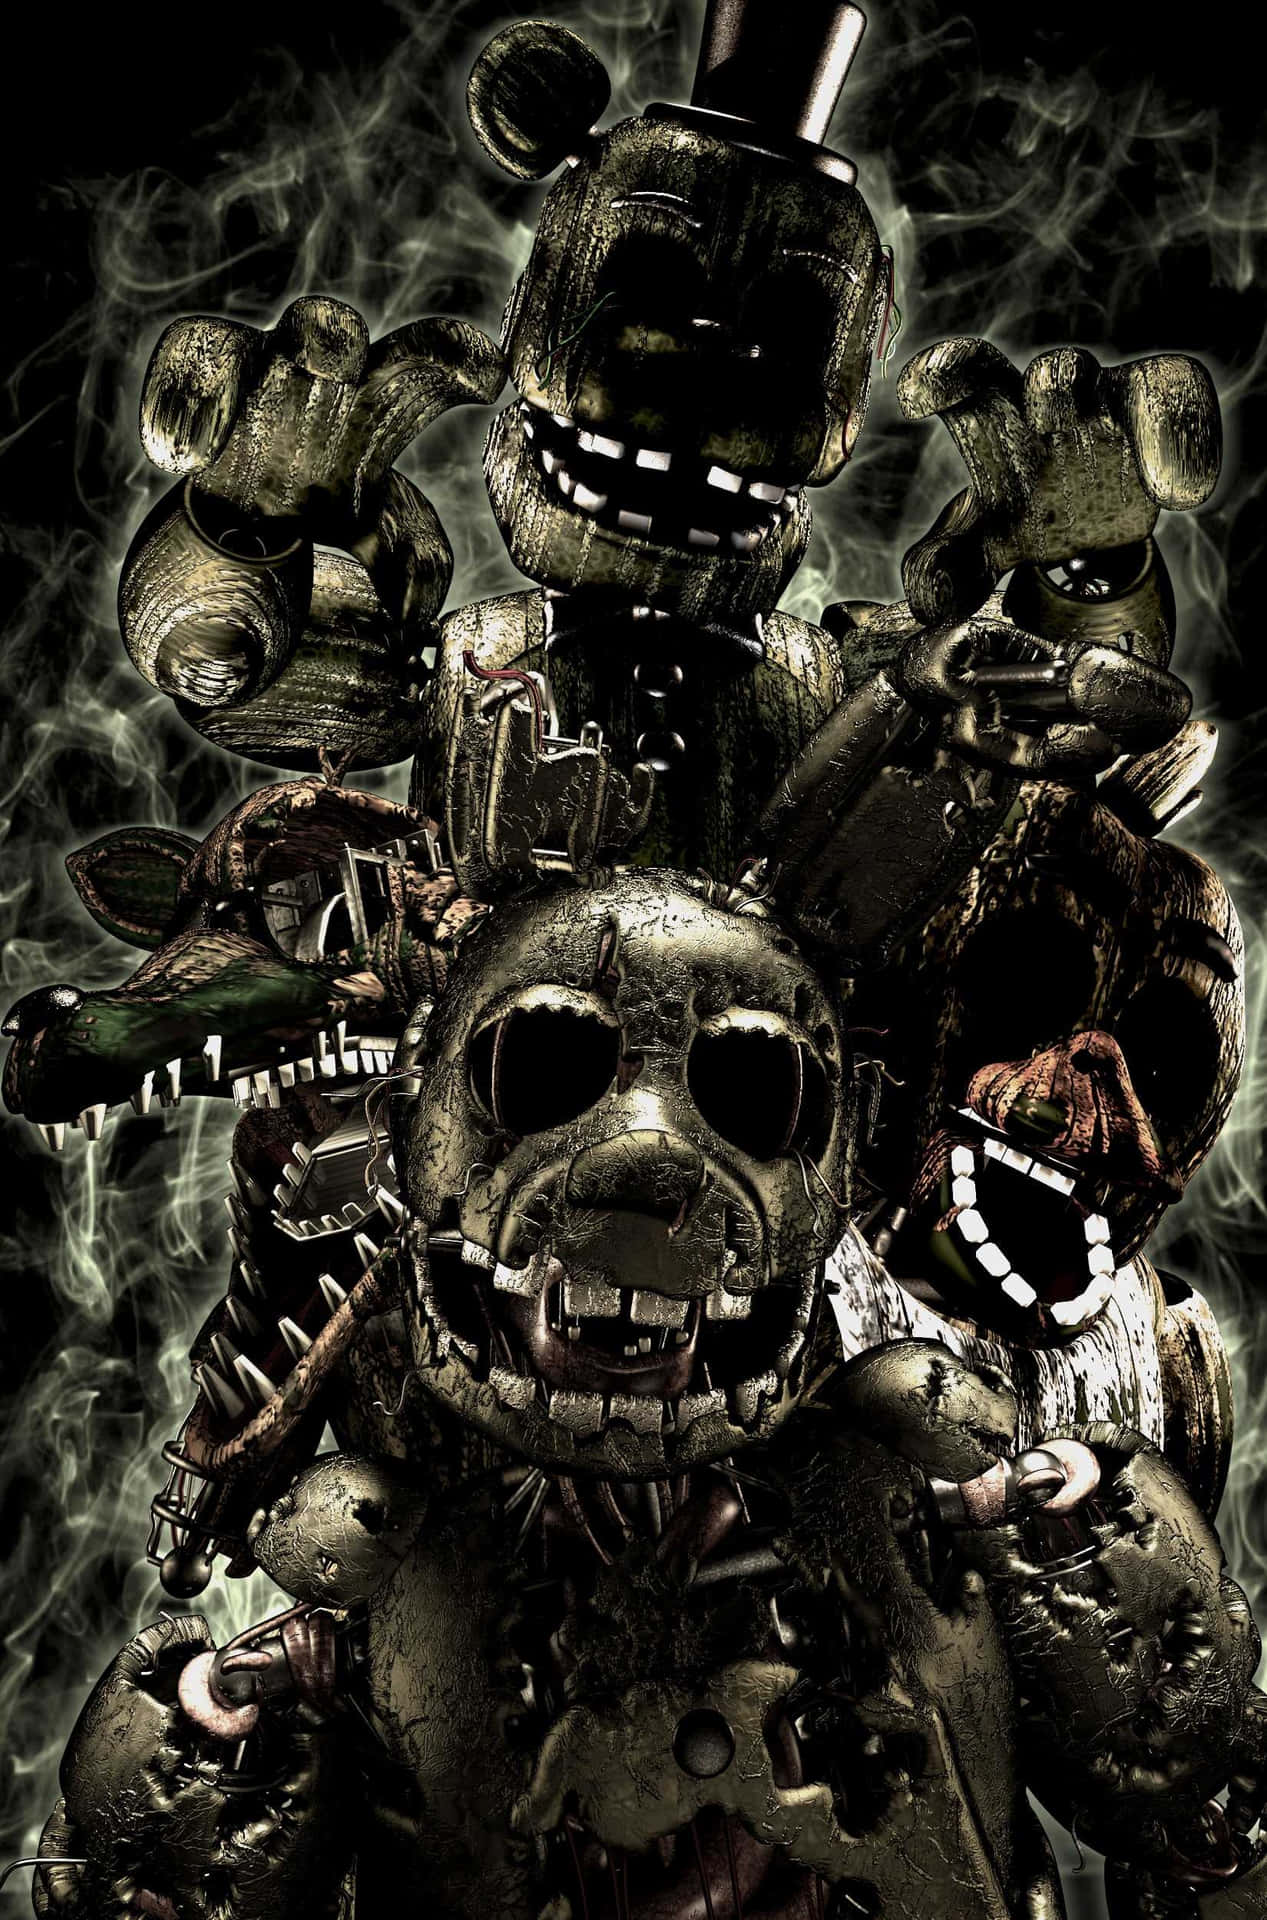 Scary Fnaf - Frightening Animatronics Ready for Action Wallpaper